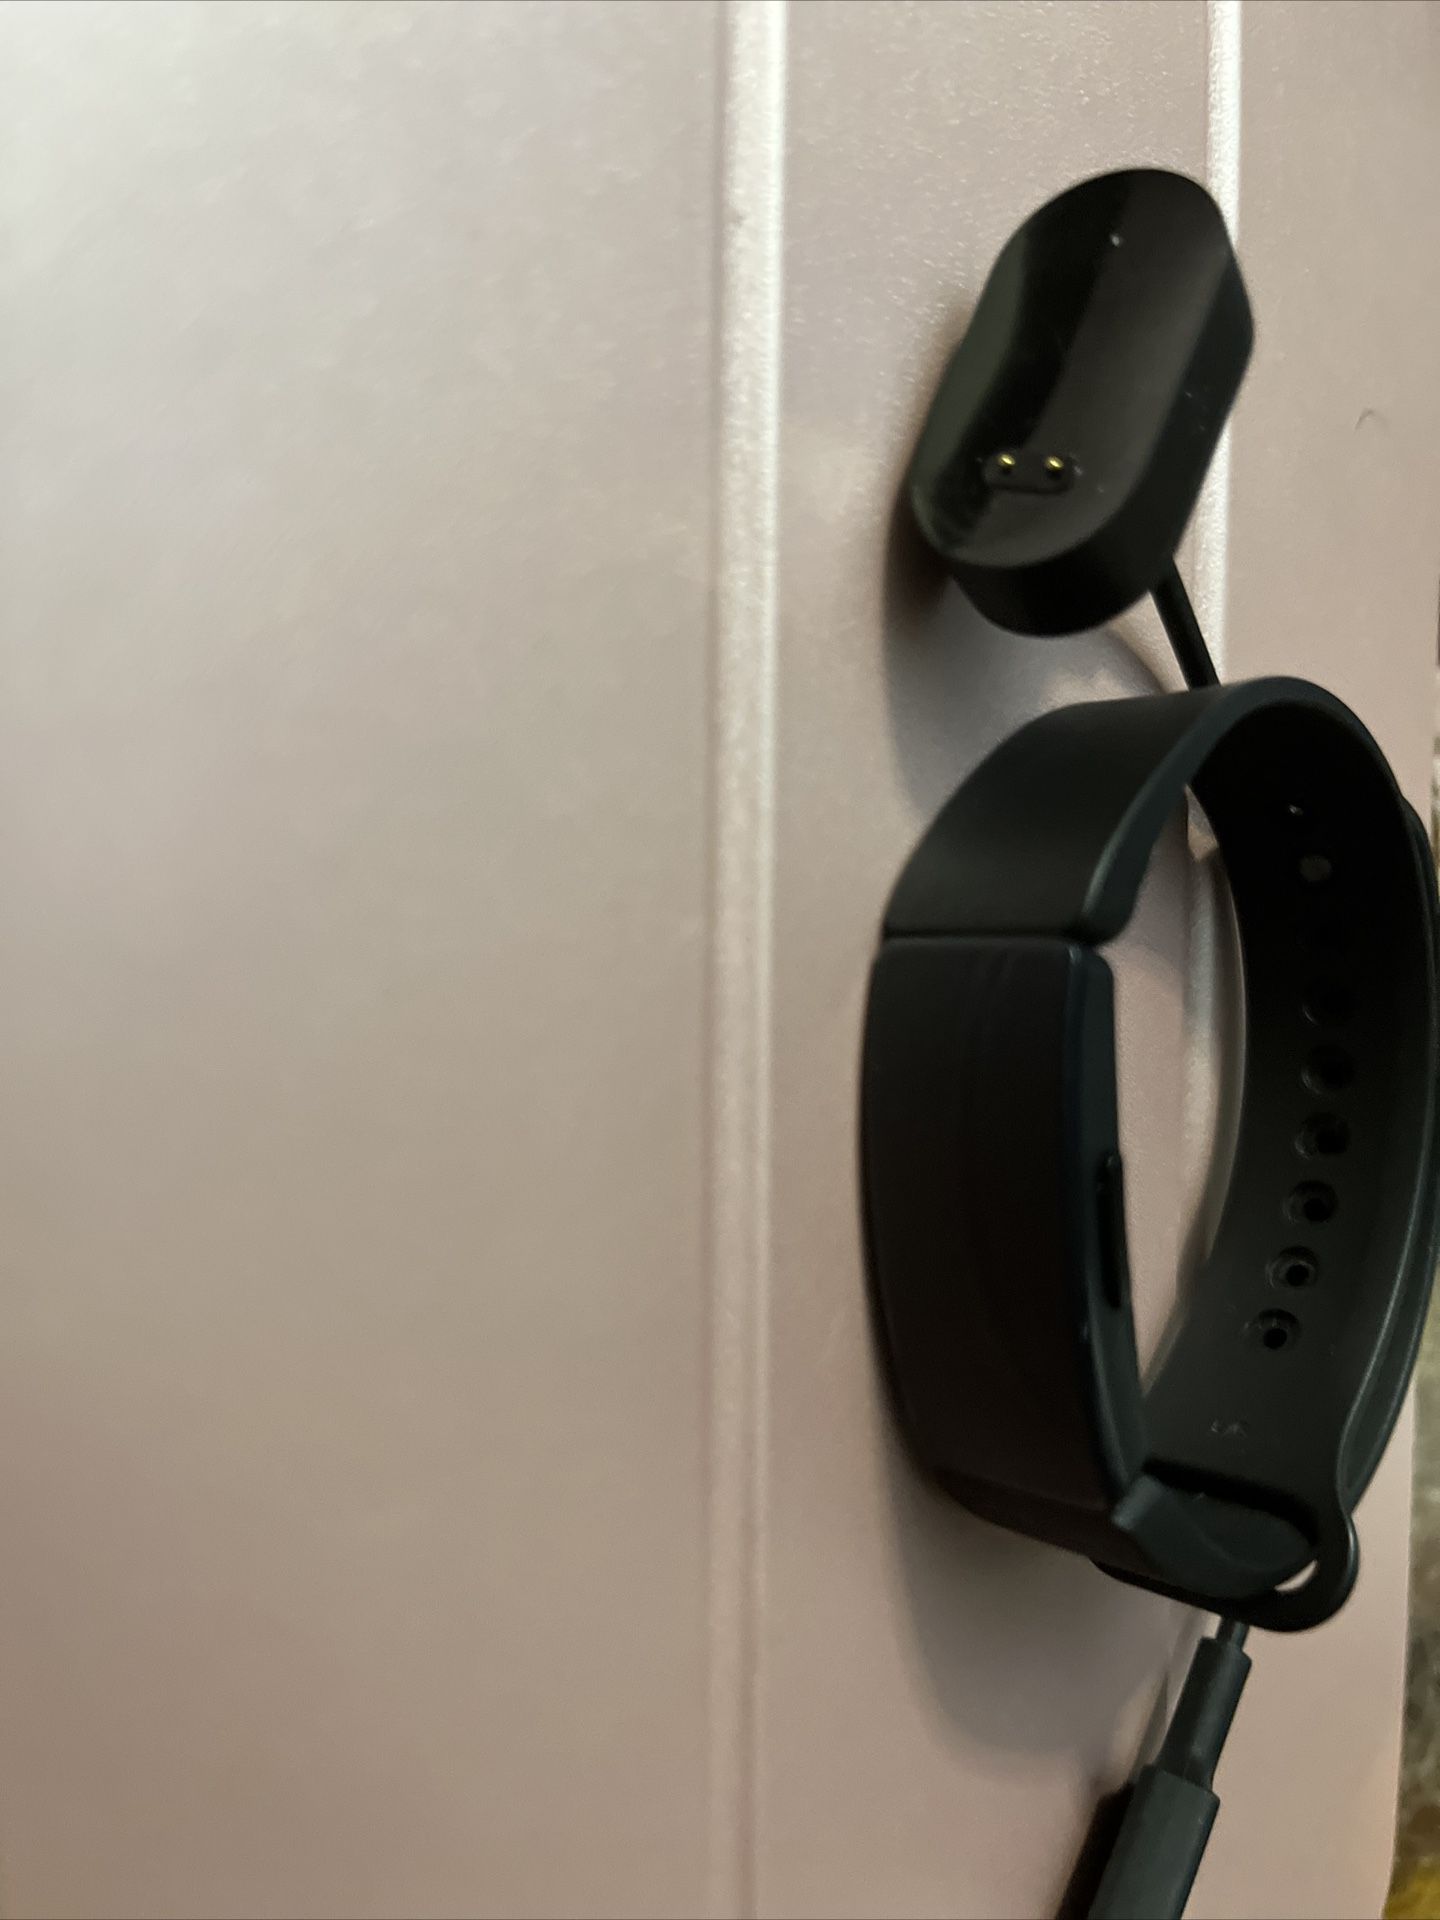 Fitbit Versa 2 Activity Tracker & Fitbit OS Tracker  With chargers And Bands